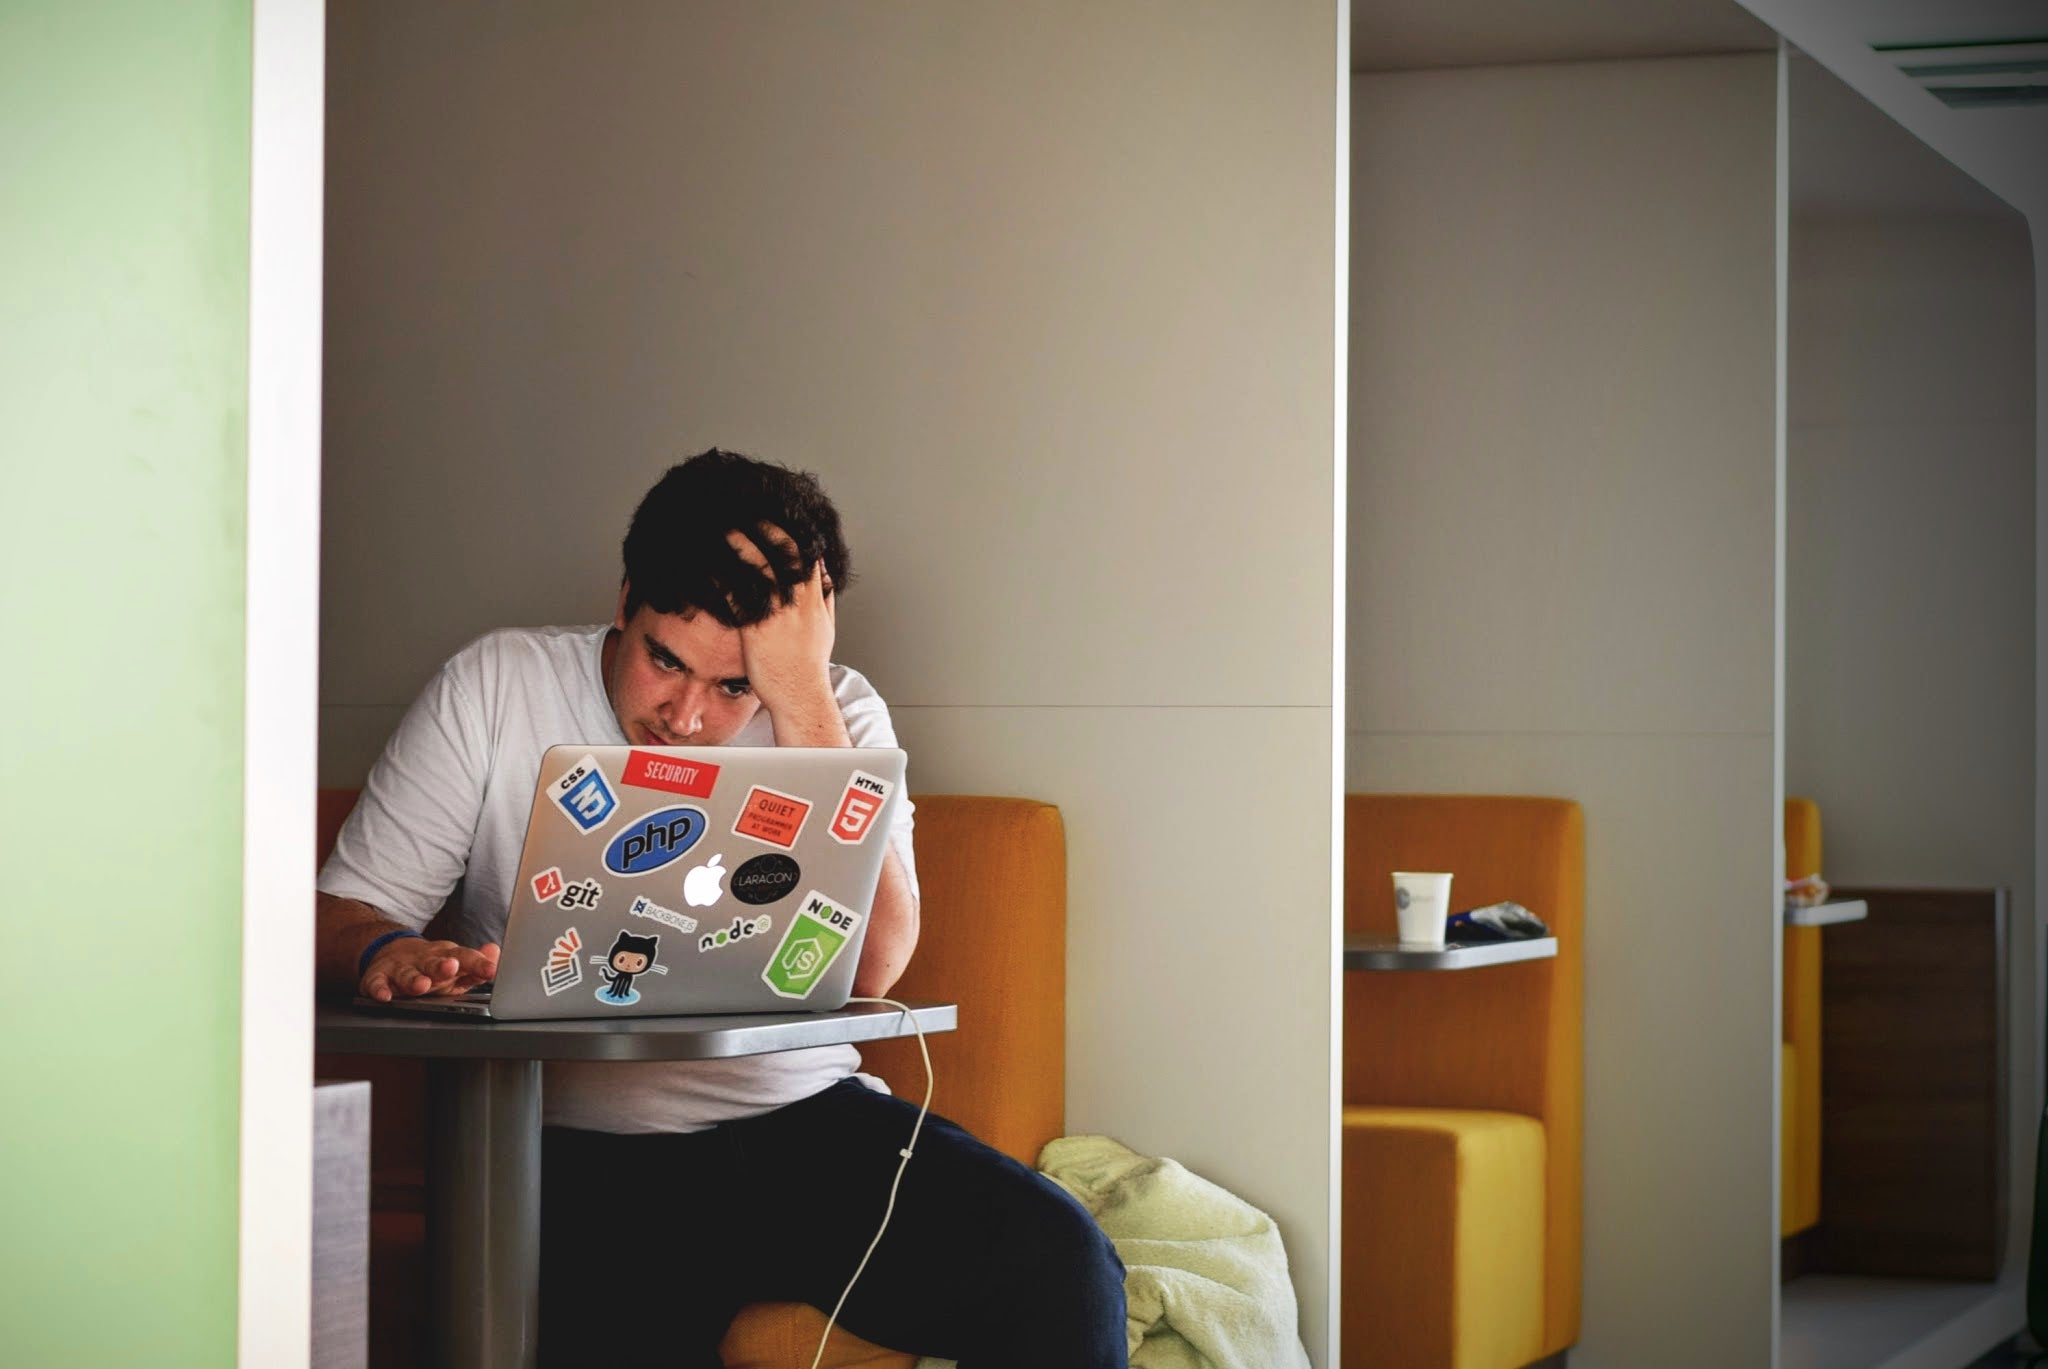 The Overworked Millenial: Time Management Vs Attention Management